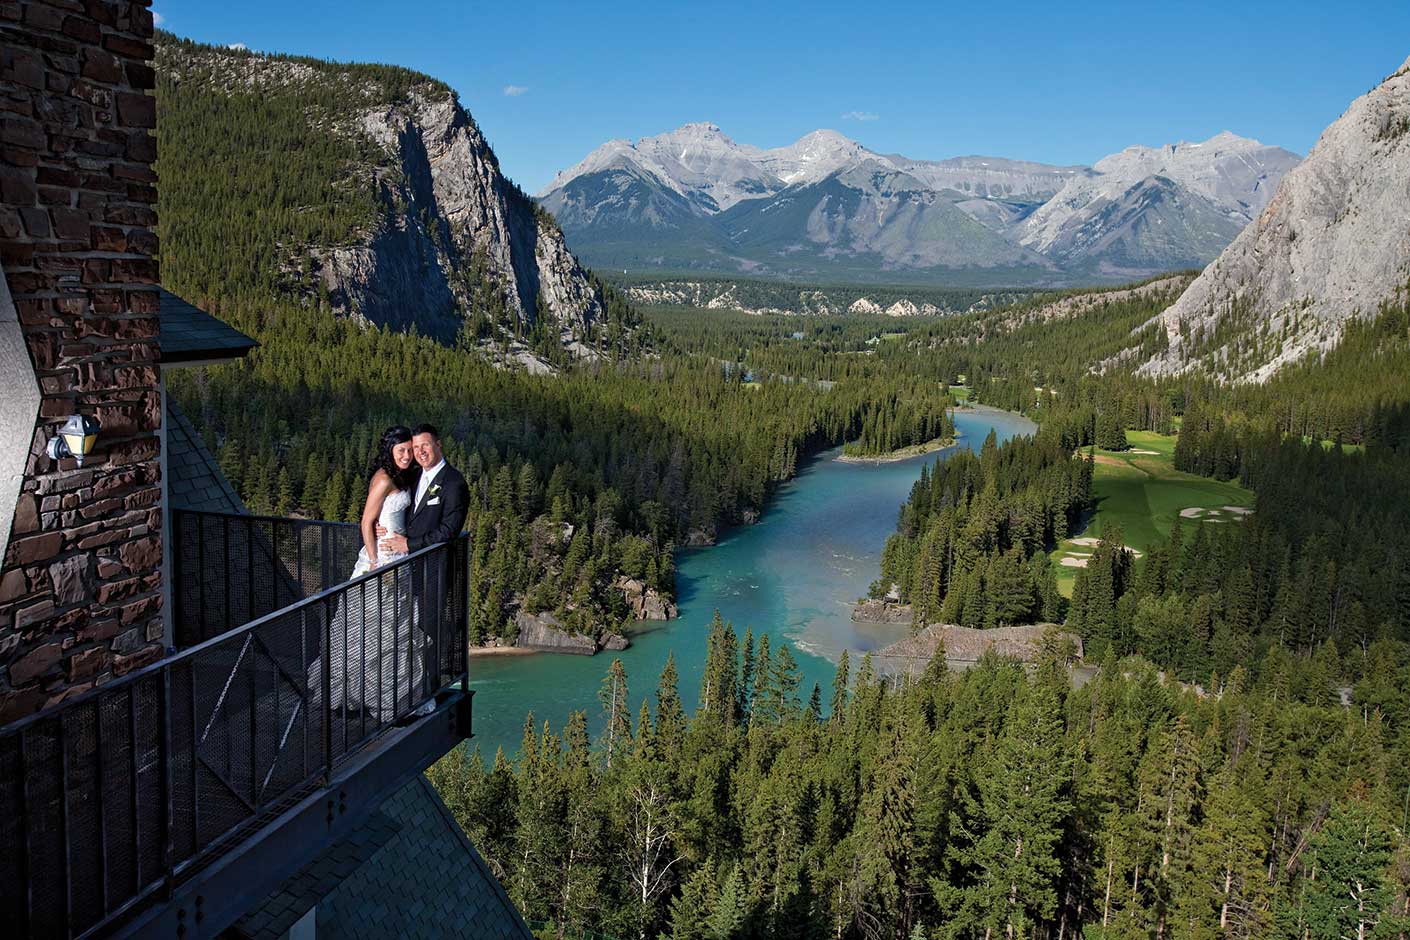 Destination Weddings Venues With Best Views | Unique Places to Get Married | Best Wedding Resorts | Fairmont Banff Springs, Alberta, Canada